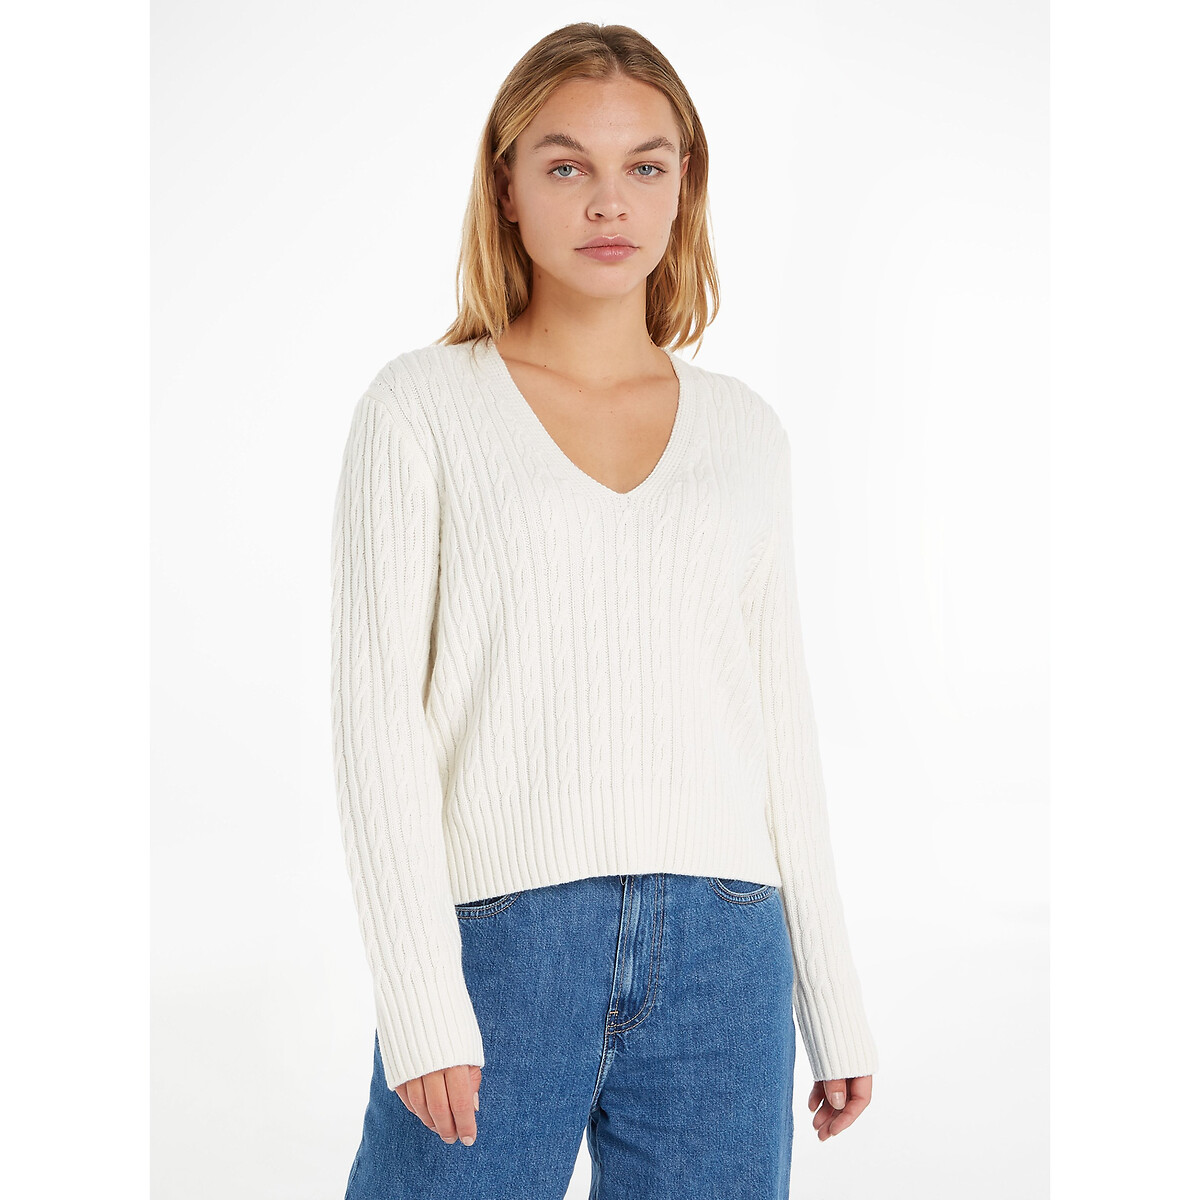 Cotton Mix Jumper in Cable Knit with V-Neck